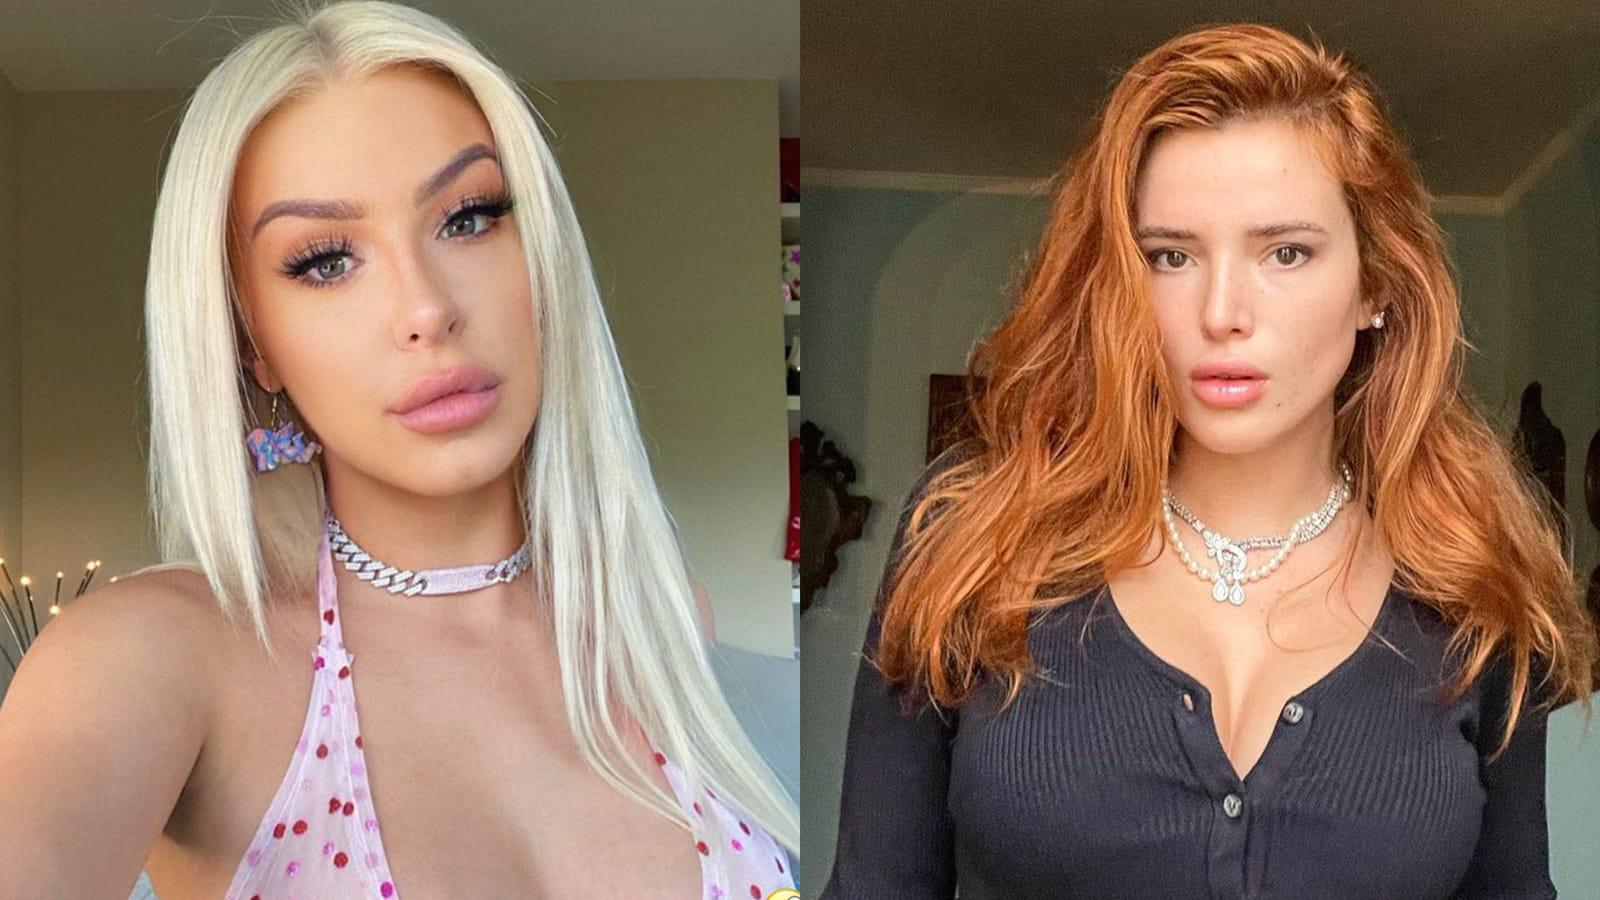 Tana Mongeau challenges Bella Thorne to fight